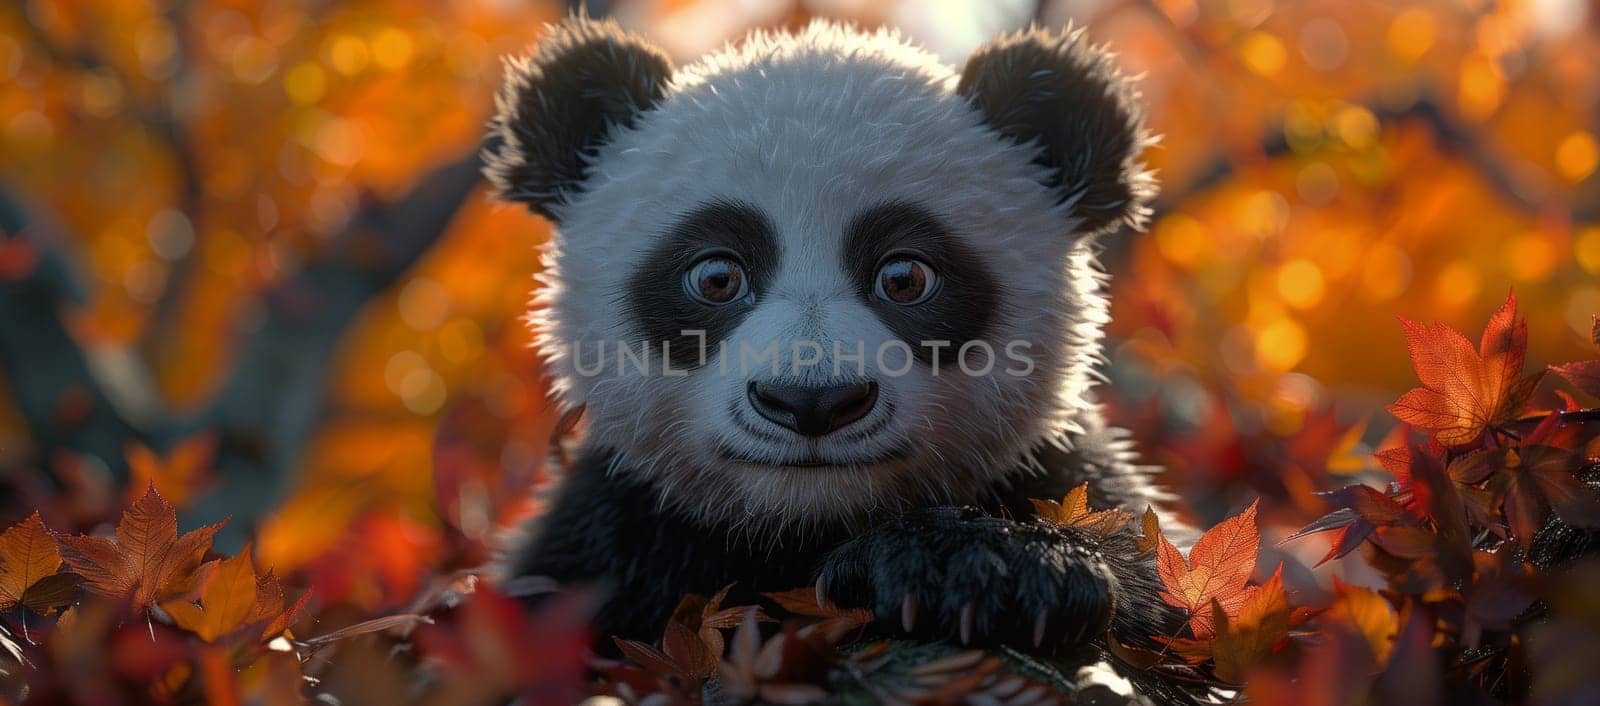 A carnivorous panda bear with fur is peacefully sitting in a pile of leaves, surrounded by terrestrial plants and trees in a natural setting